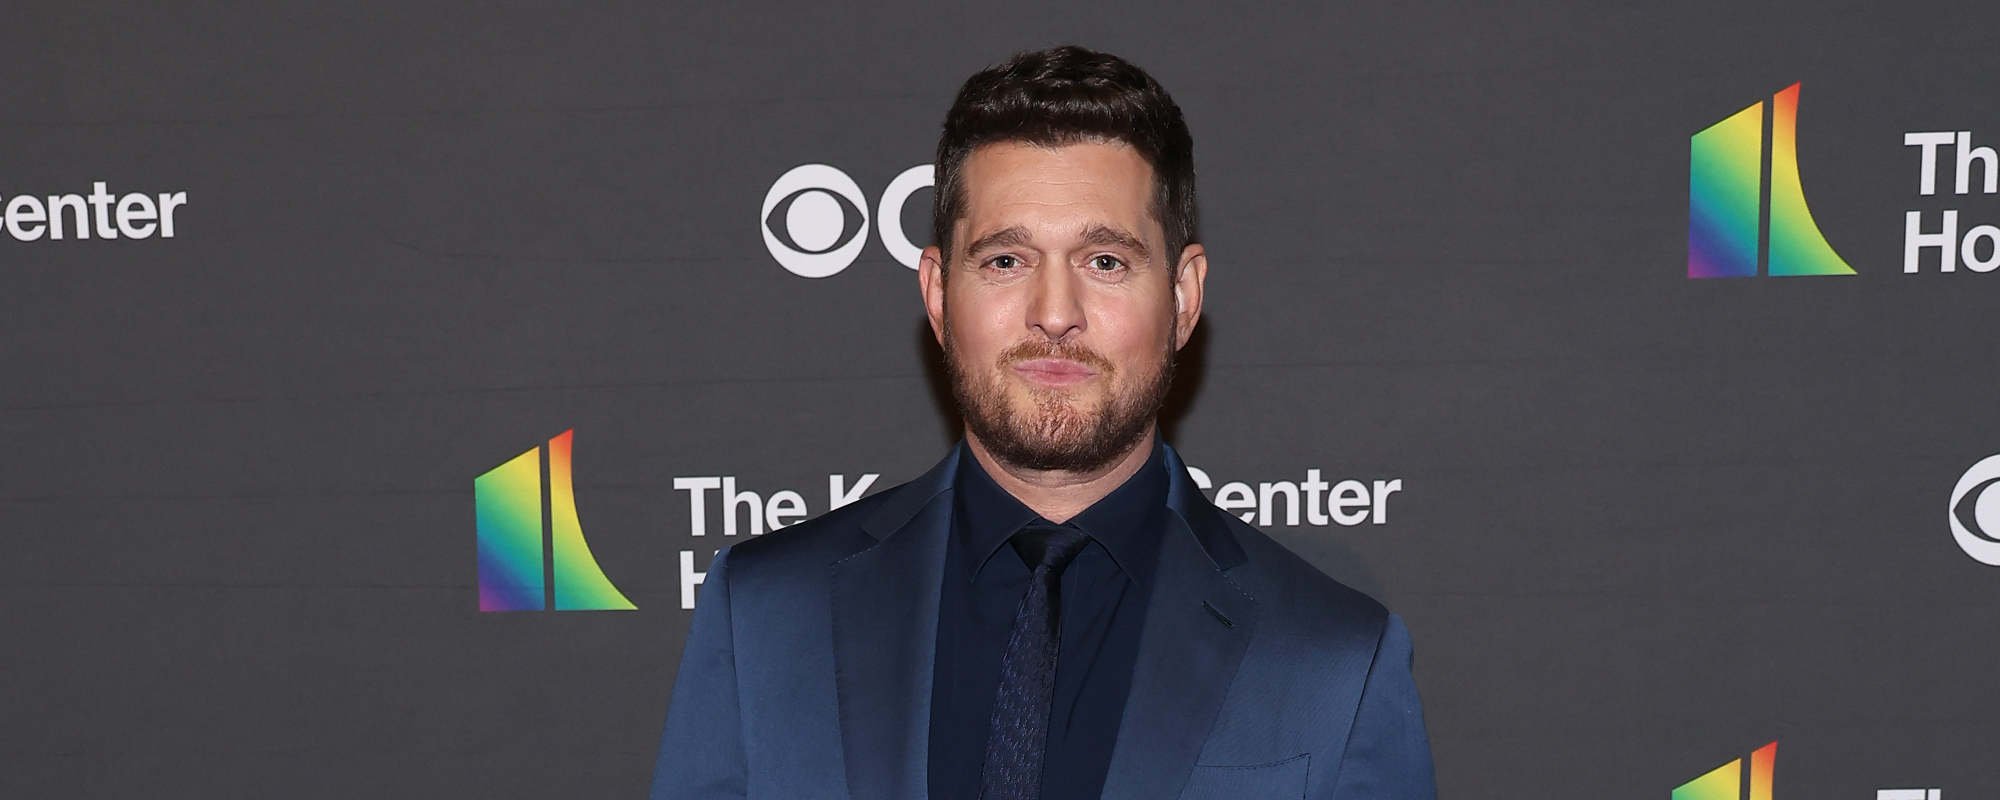 Michael Bublé Says Son’s Cancer Battle “Was a Sledgehammer to My Reality,” Reveals Promise He Made to Himself in the Moment